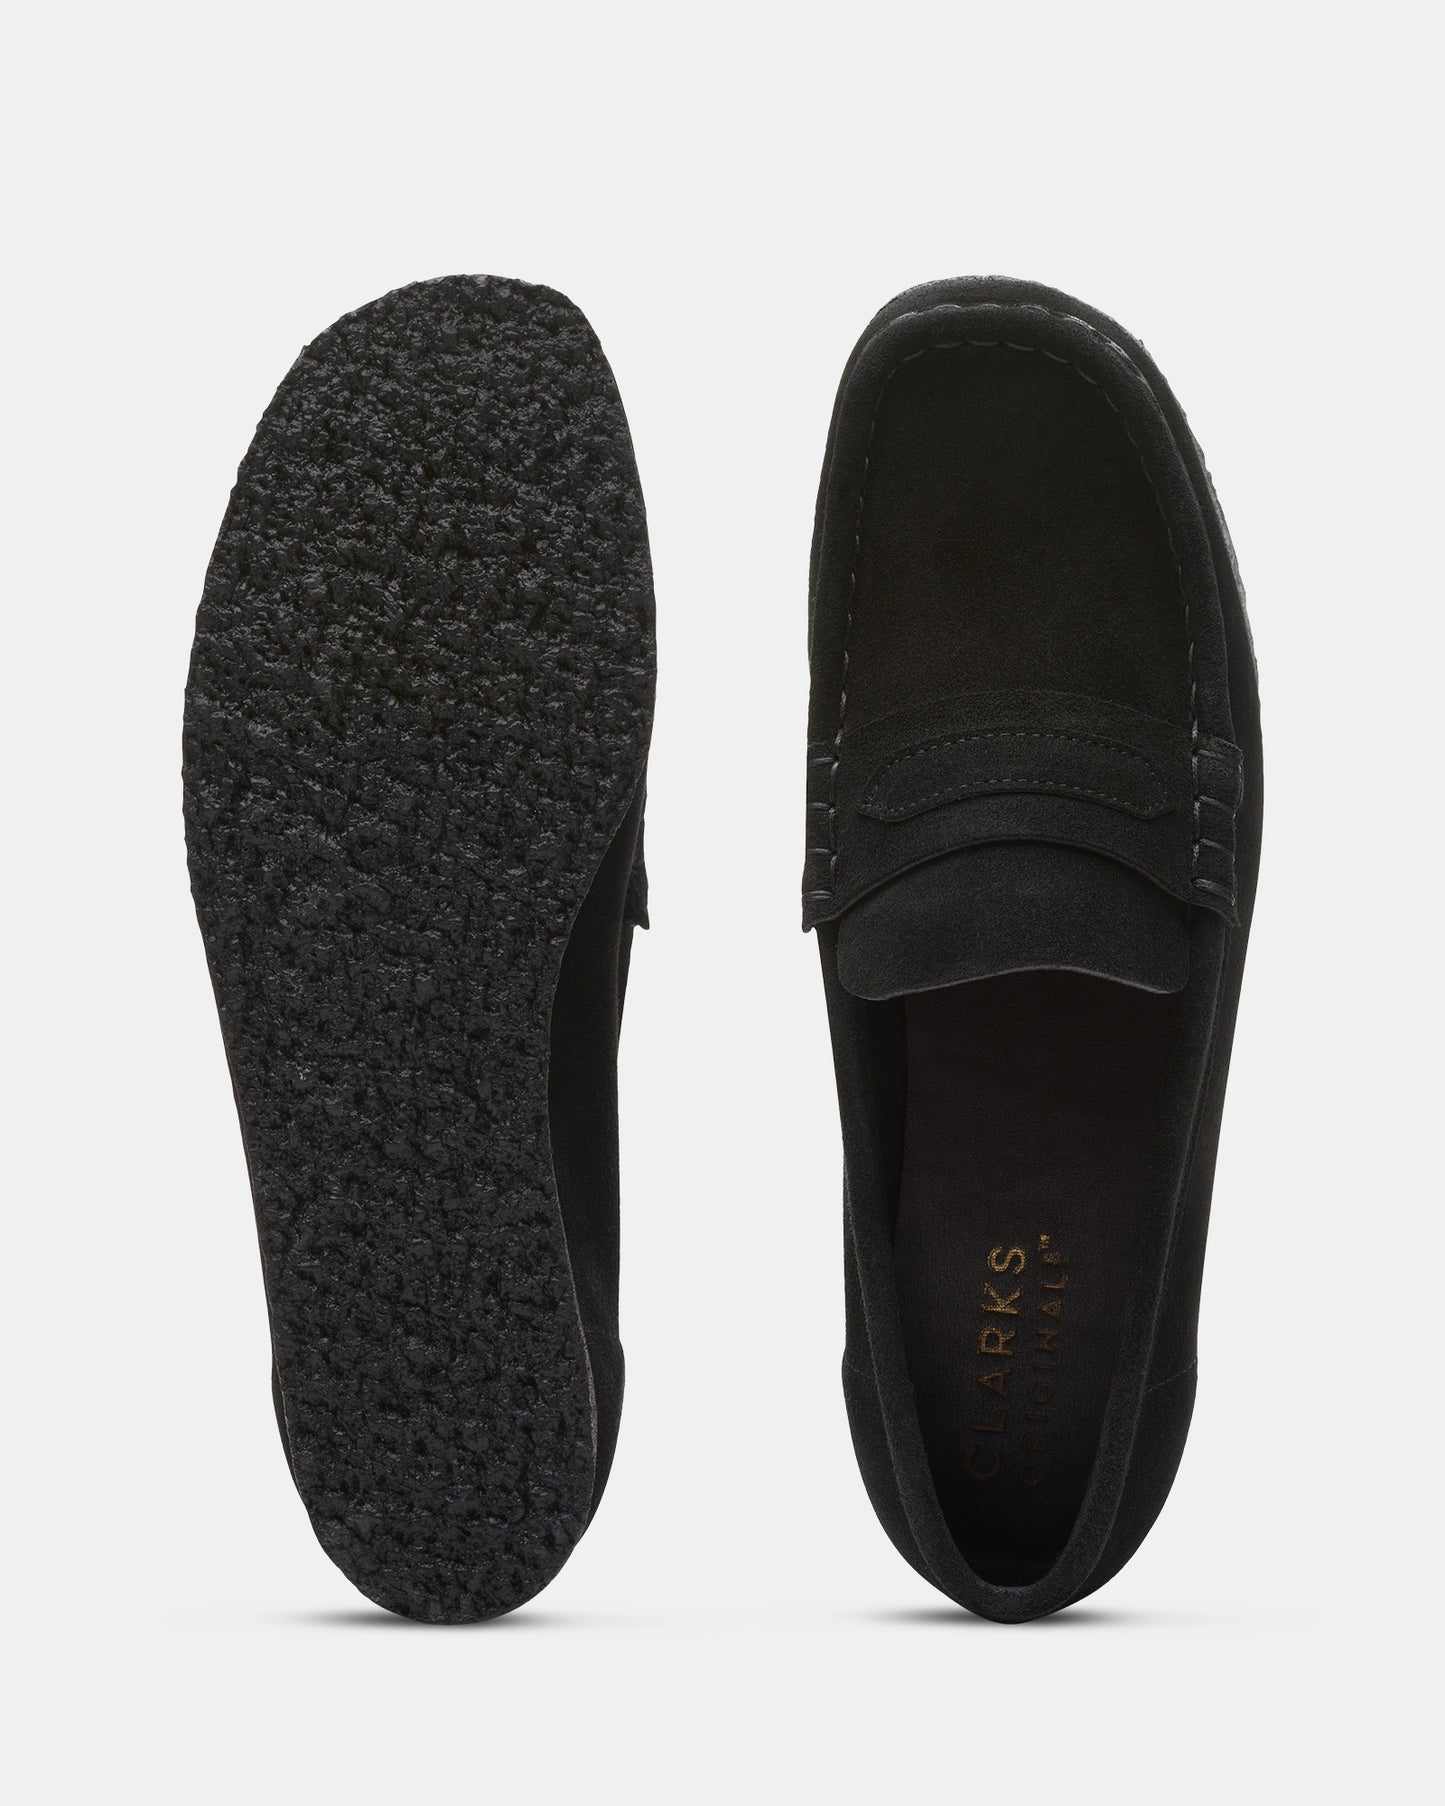 Wallabee Loafer Black Suede